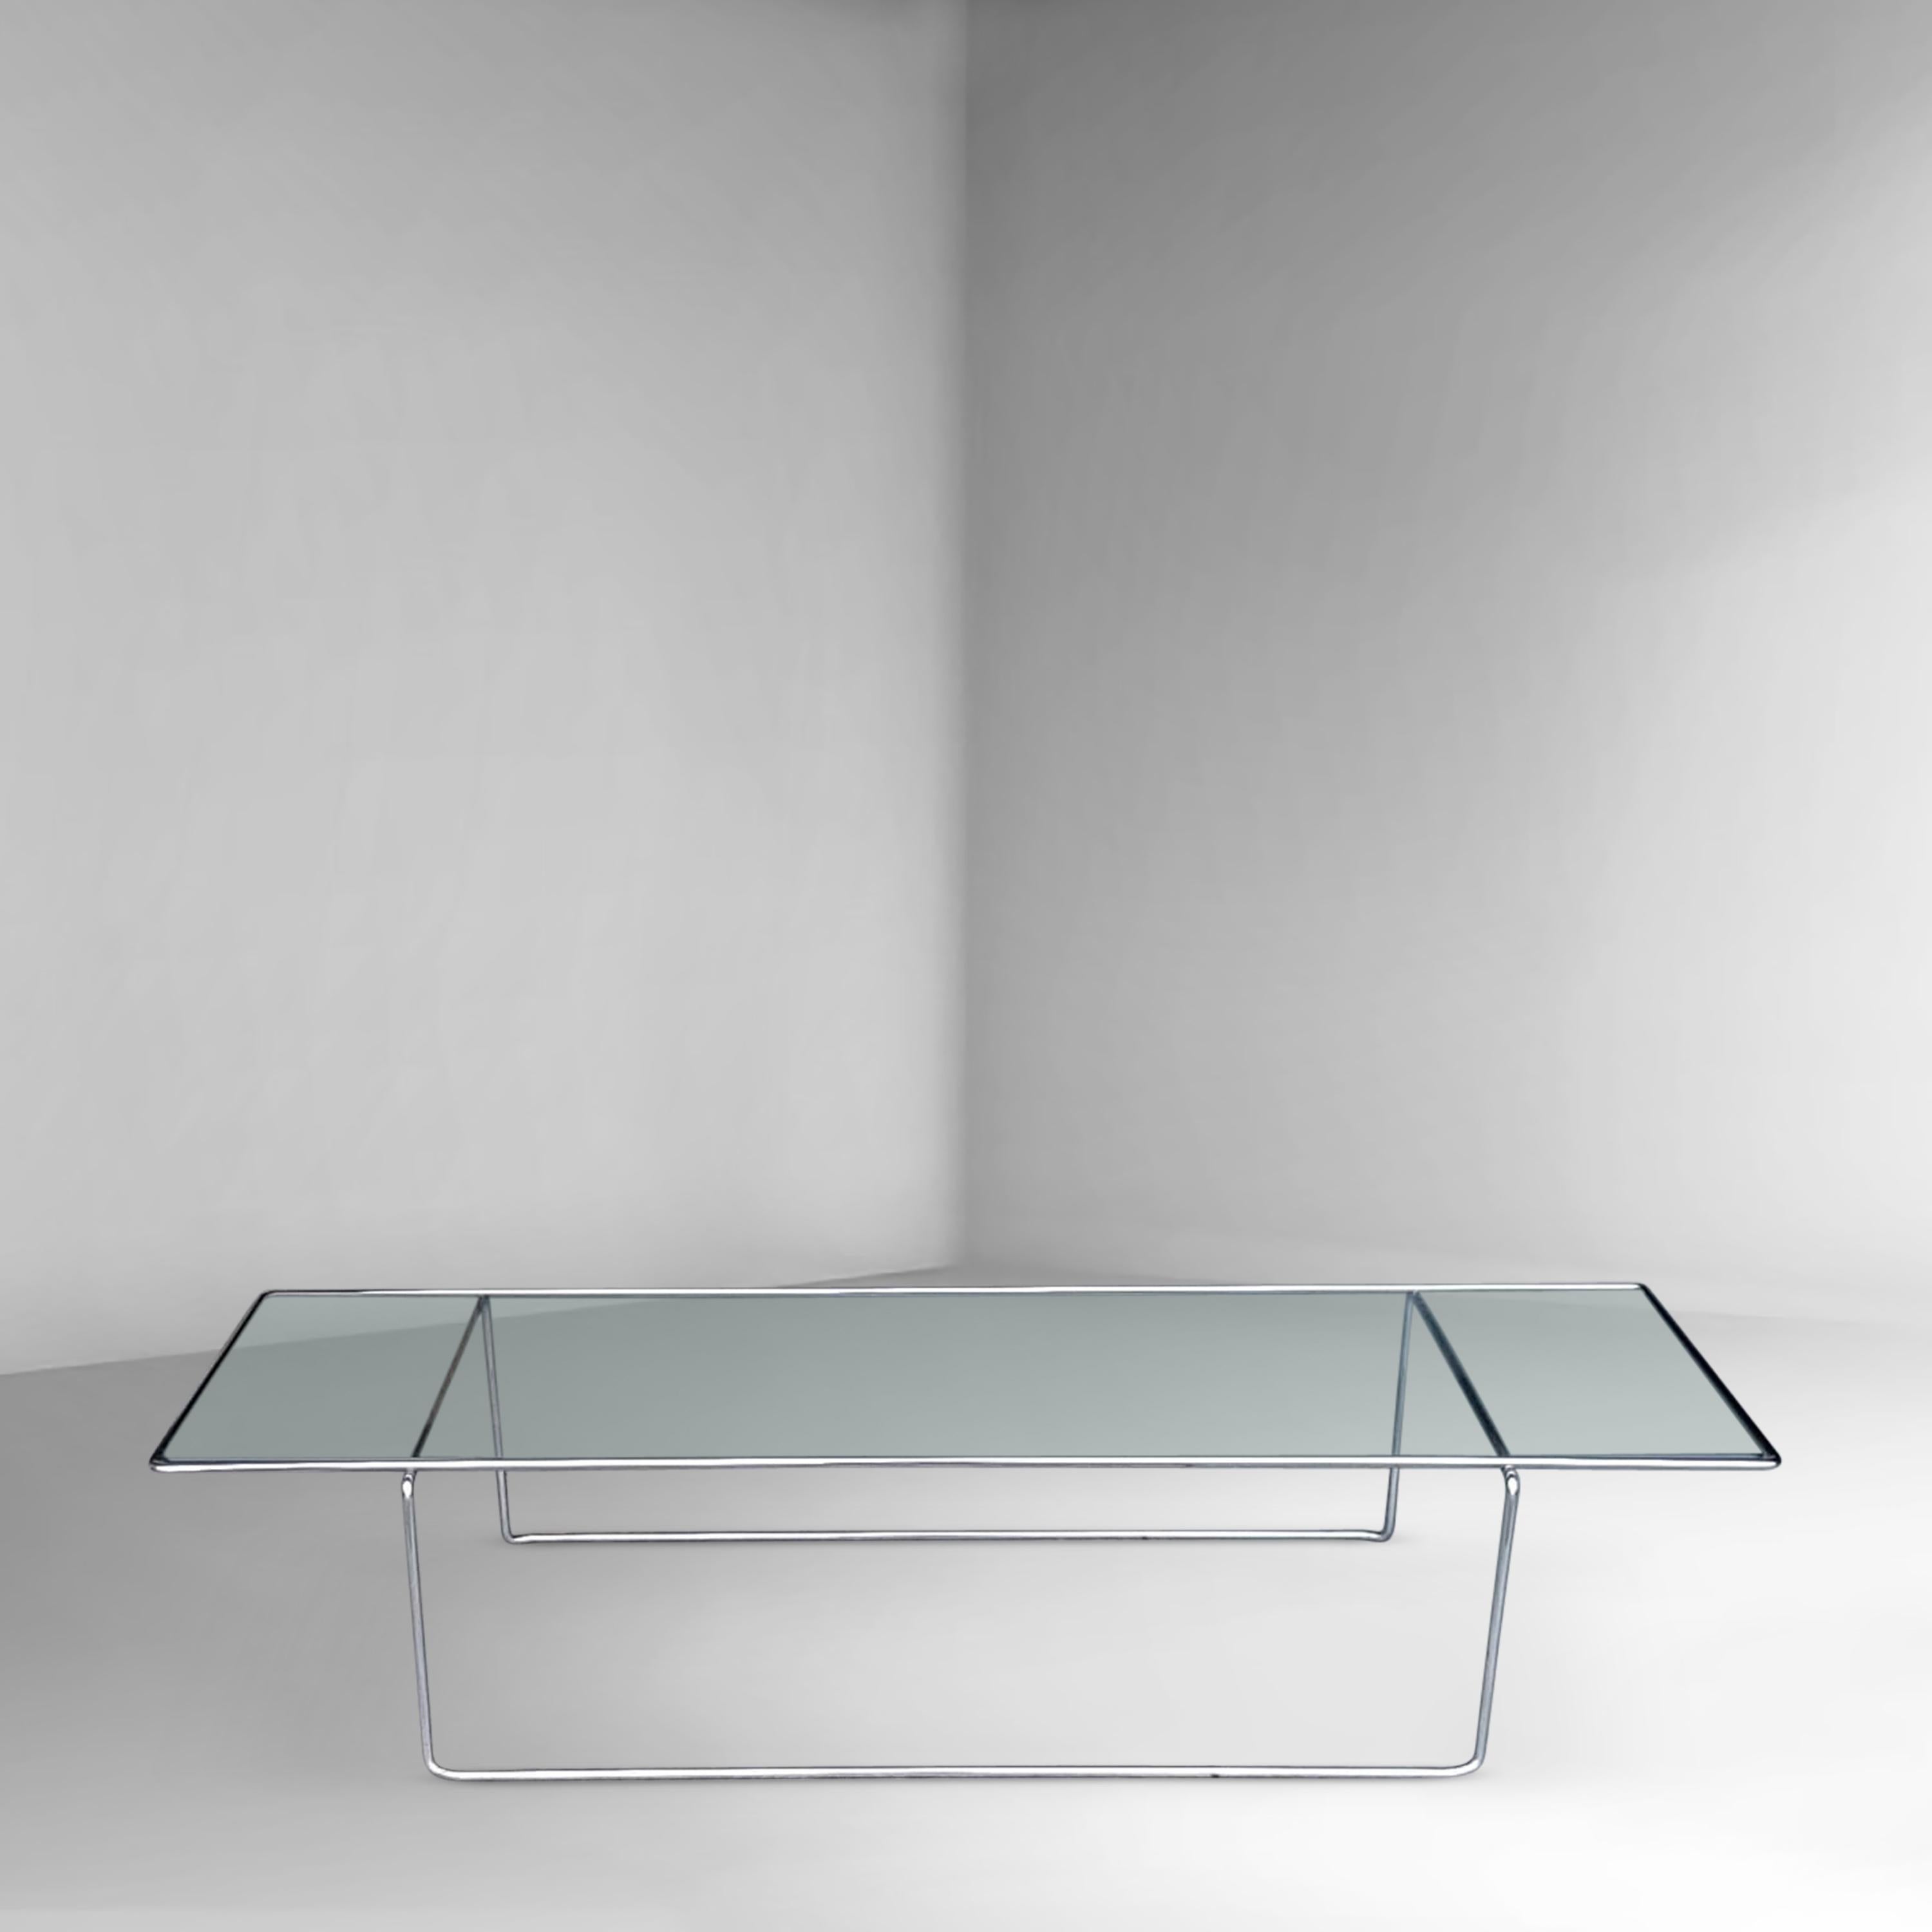 Minimalist design coffee table, inspired by Mies van der Rohe with simple abstract lines. The metal lower and upper frame are bent steel and consist of 1 part. The entire design looks very sleek due to its thin shaped frame. The glass plate lays